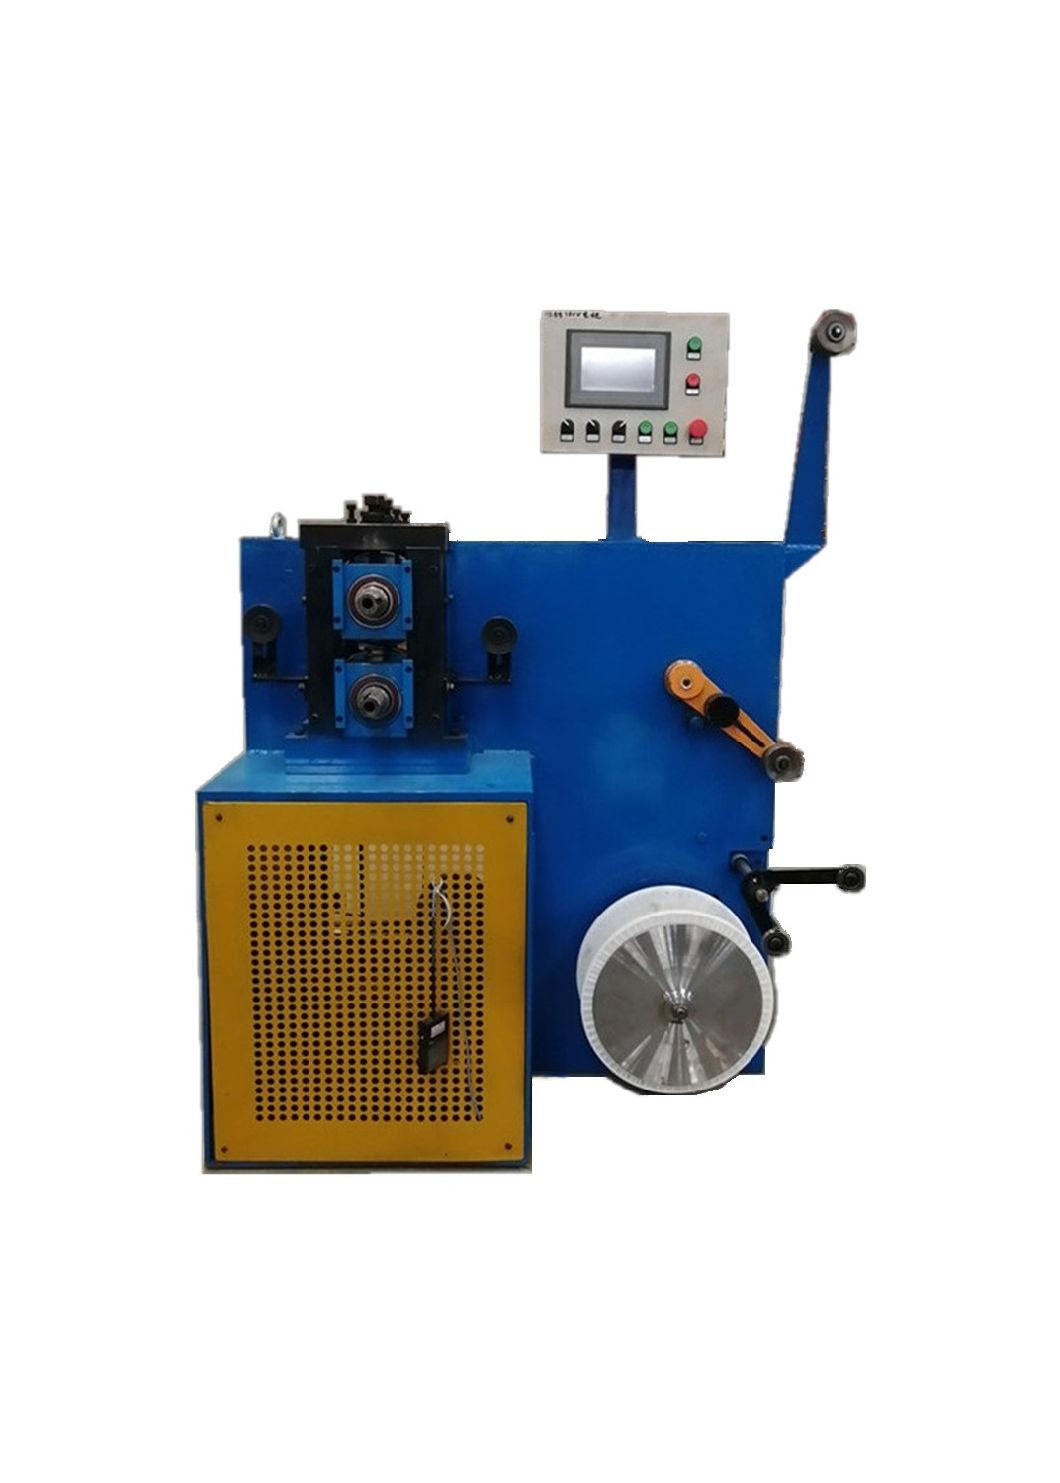 Wire Drawing Machine Water Tank Wire Drawing Machine for Staple Pins